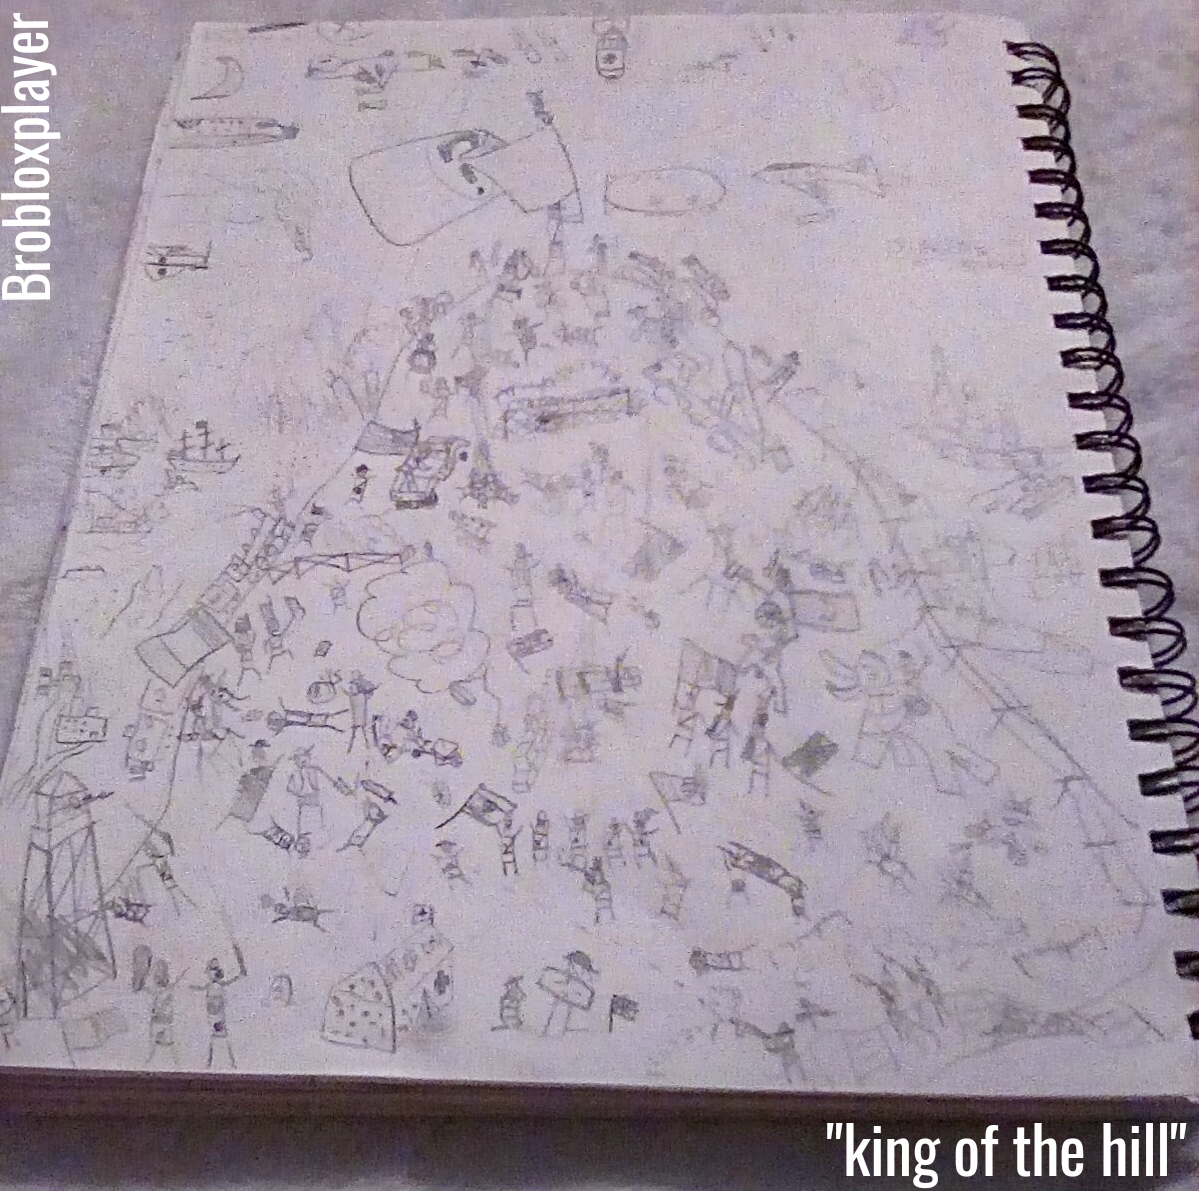 King of the hill The Movie - Poster by JoshuaStuart on DeviantArt